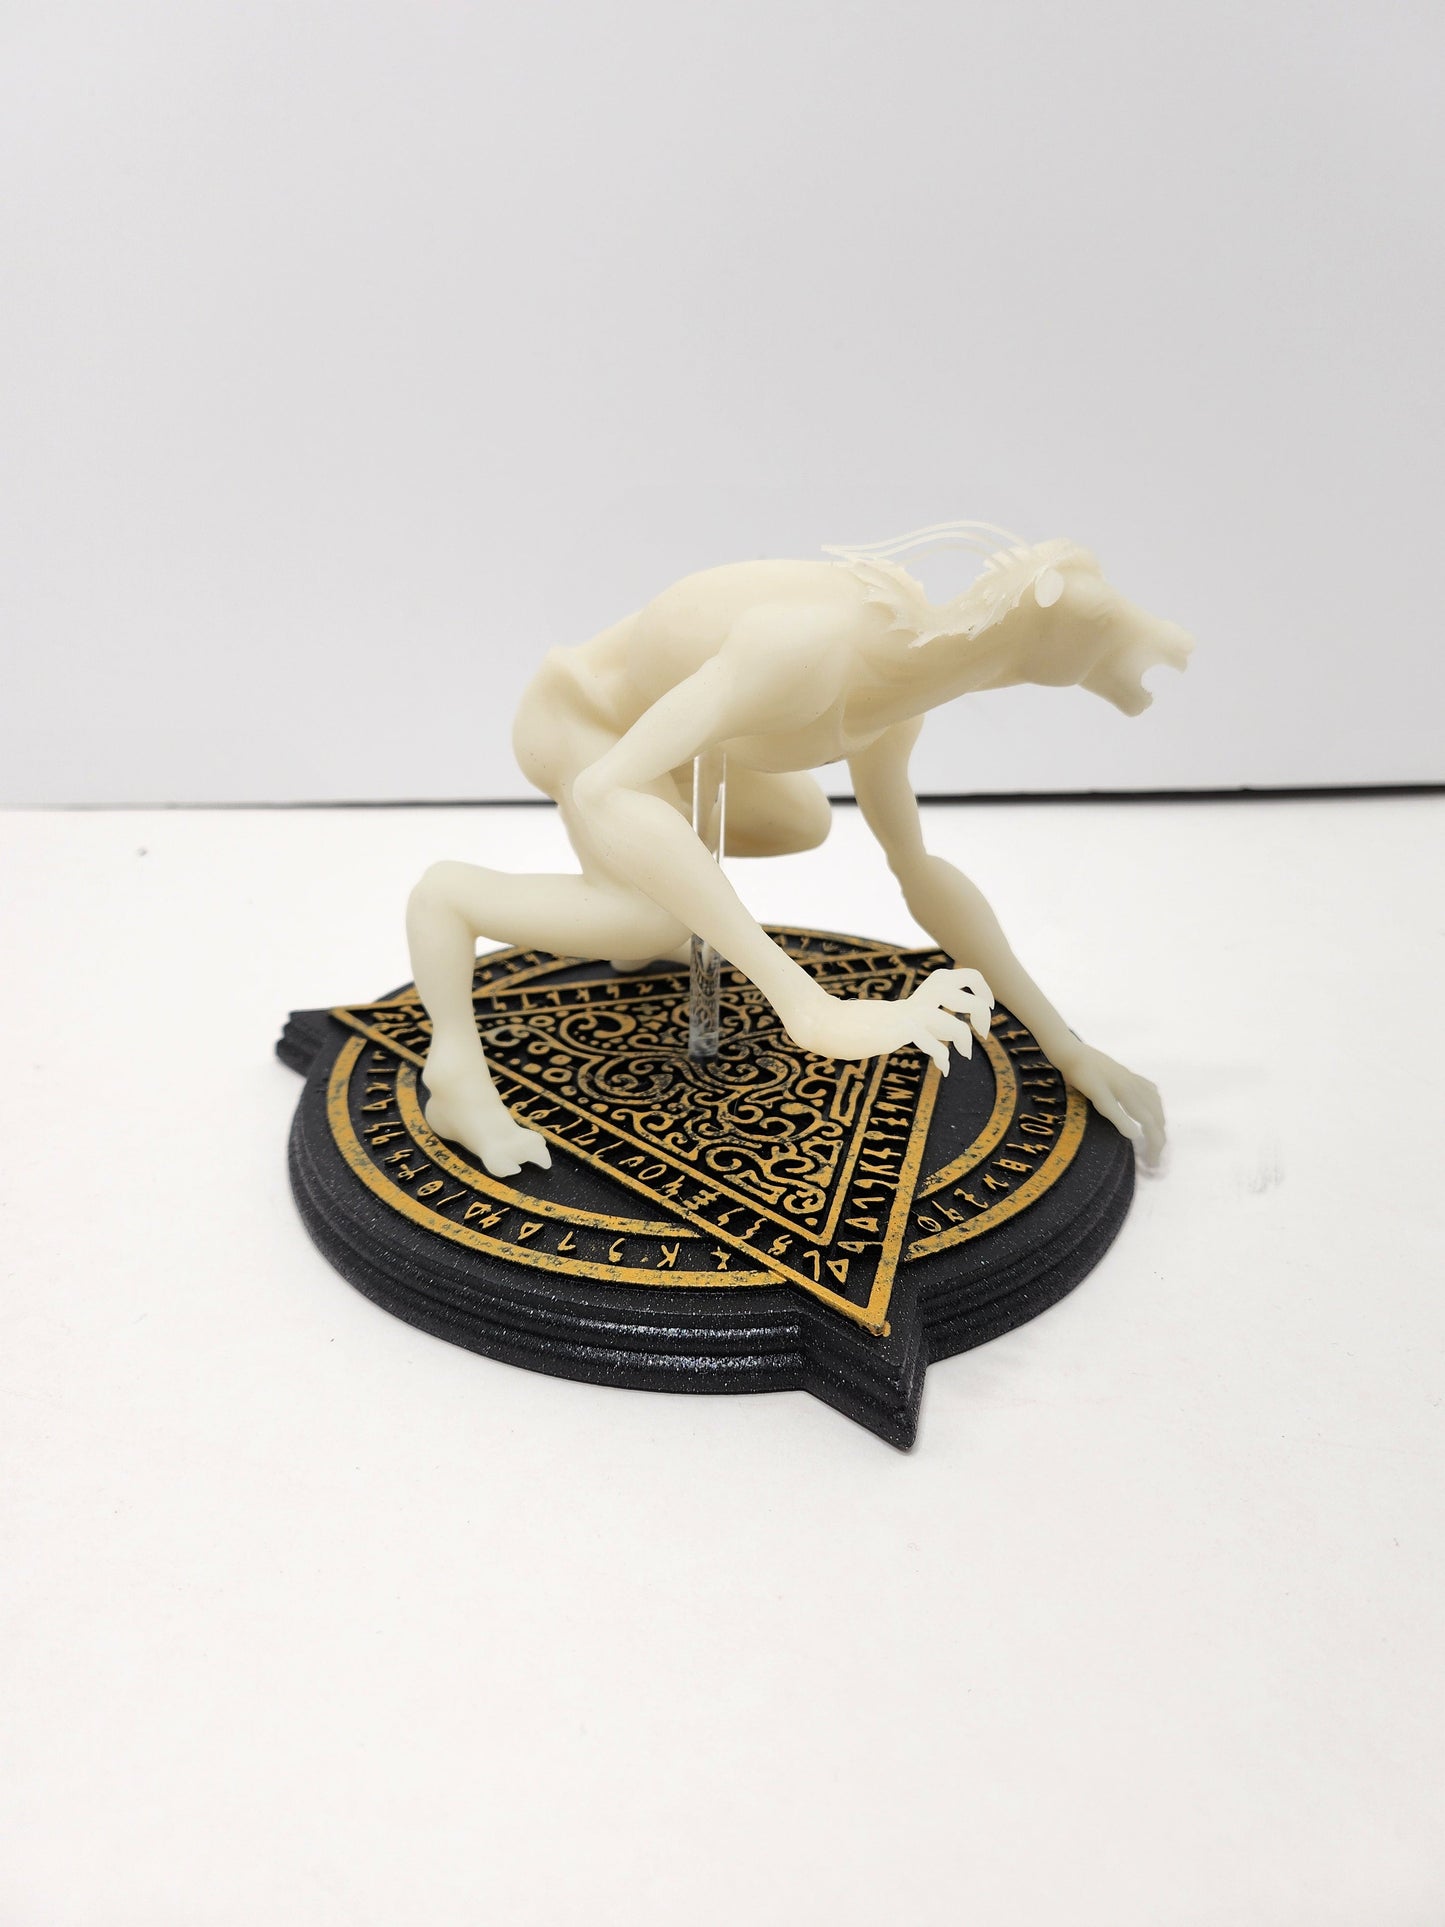 3D Printed Glow-in-the-Dark Tikbalang - Unleash the Mythical Horror! - Spectral Ink Shop - Figurine -SIP-F-TIK-GLOW